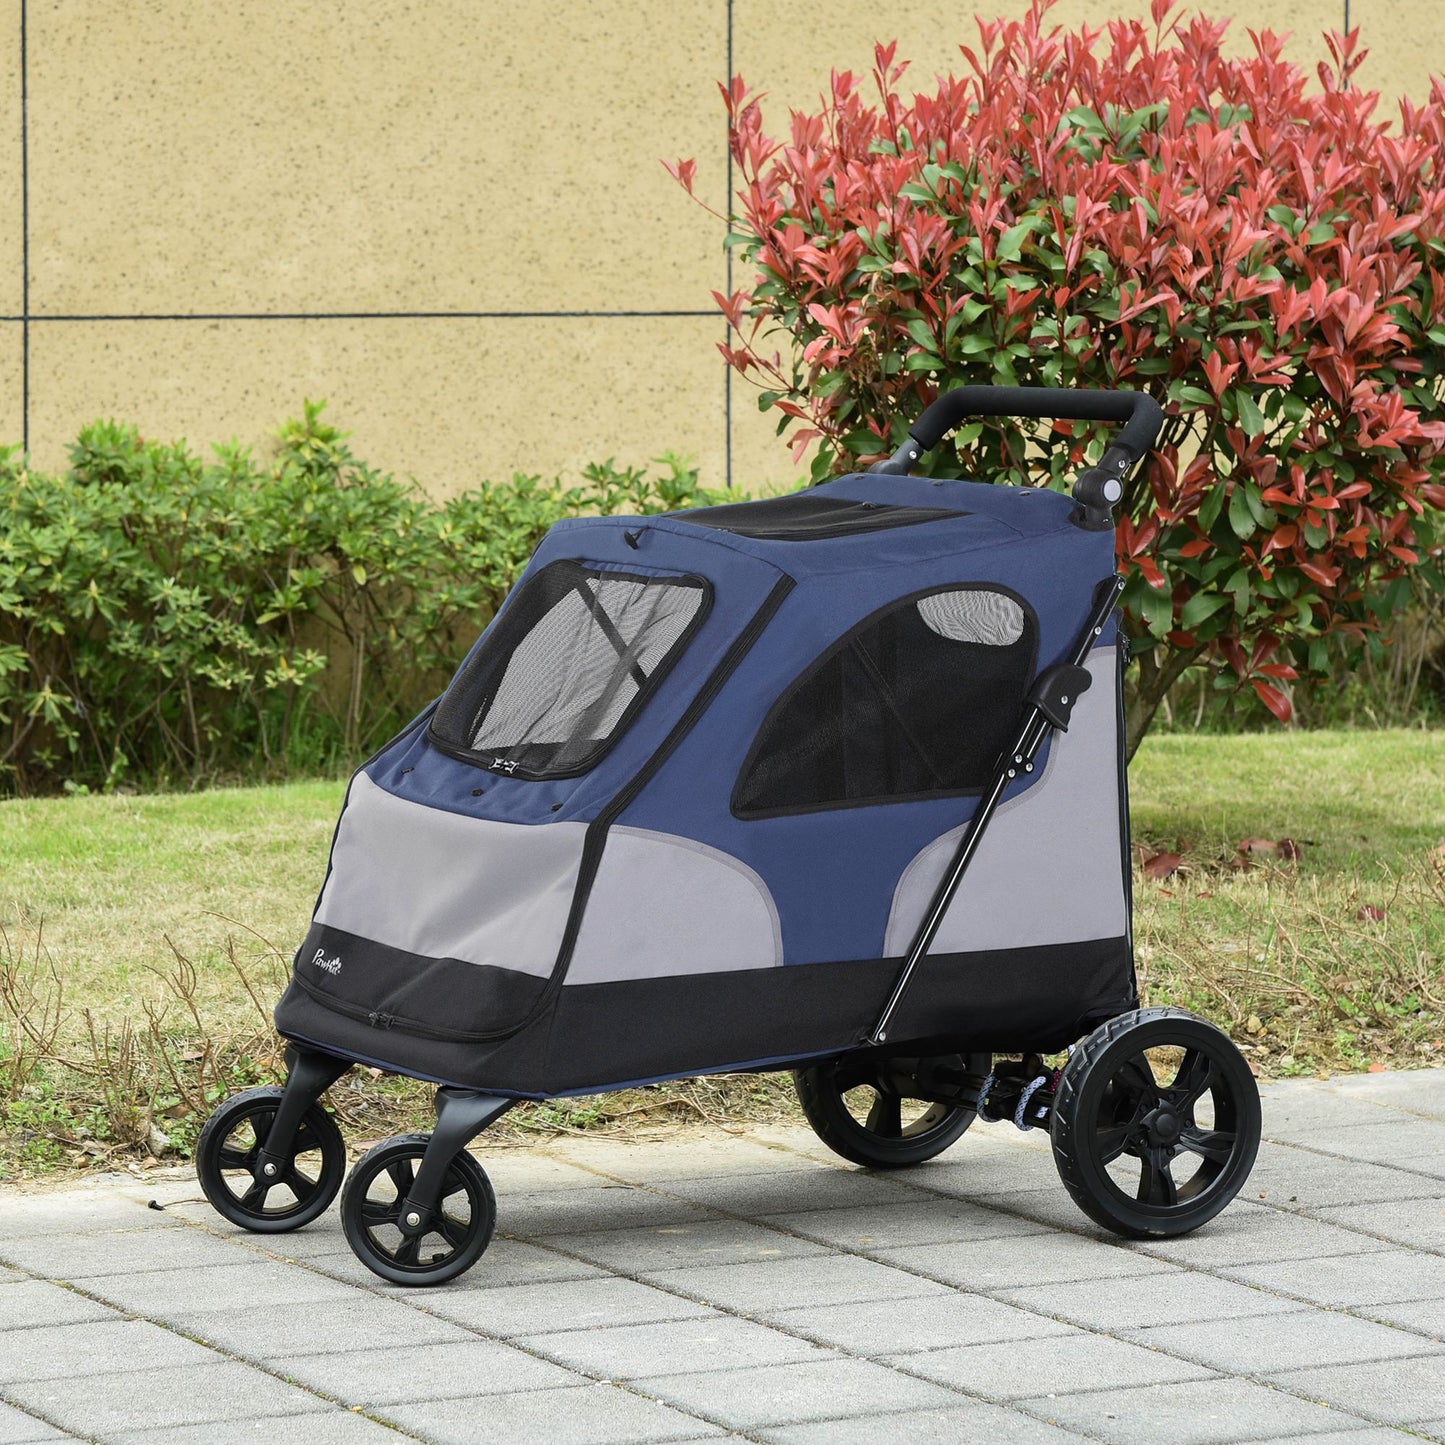 PawHut Pet Stroller Dog Foldable Travel Carriage with Adjustable Handle Blue